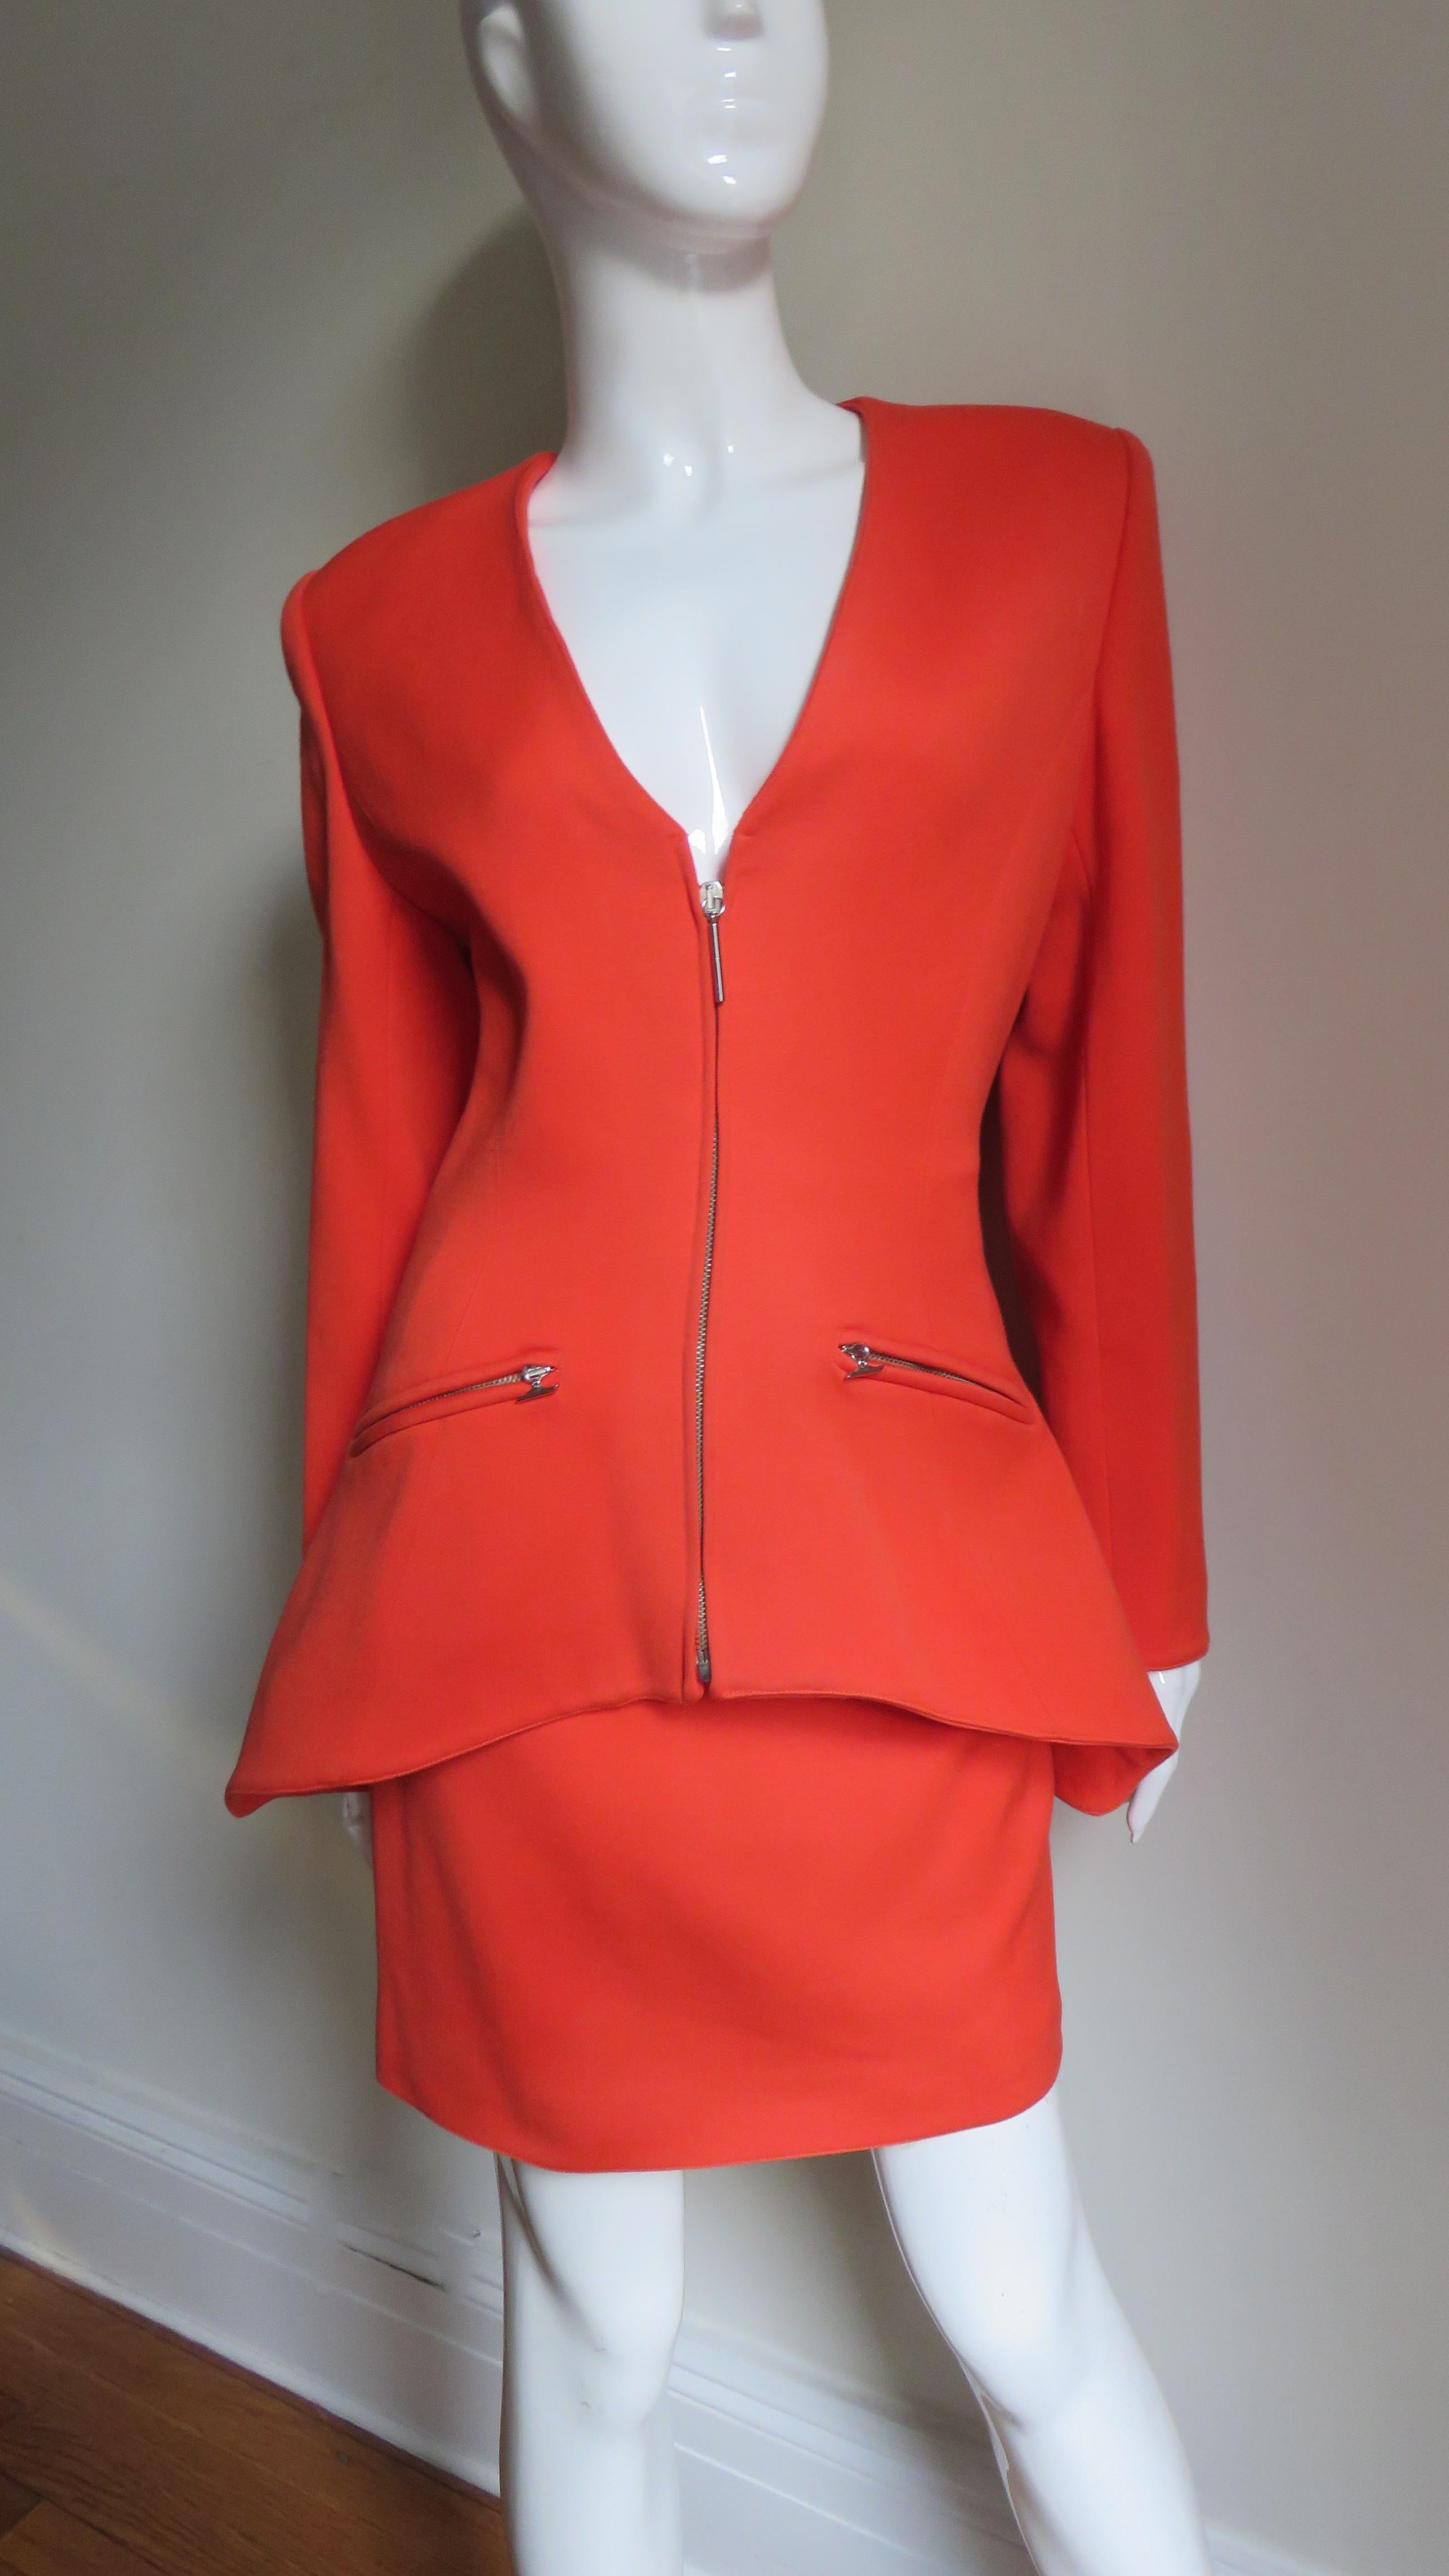 Women's Claude Montana New Skirt Suit A/W 1991 For Sale